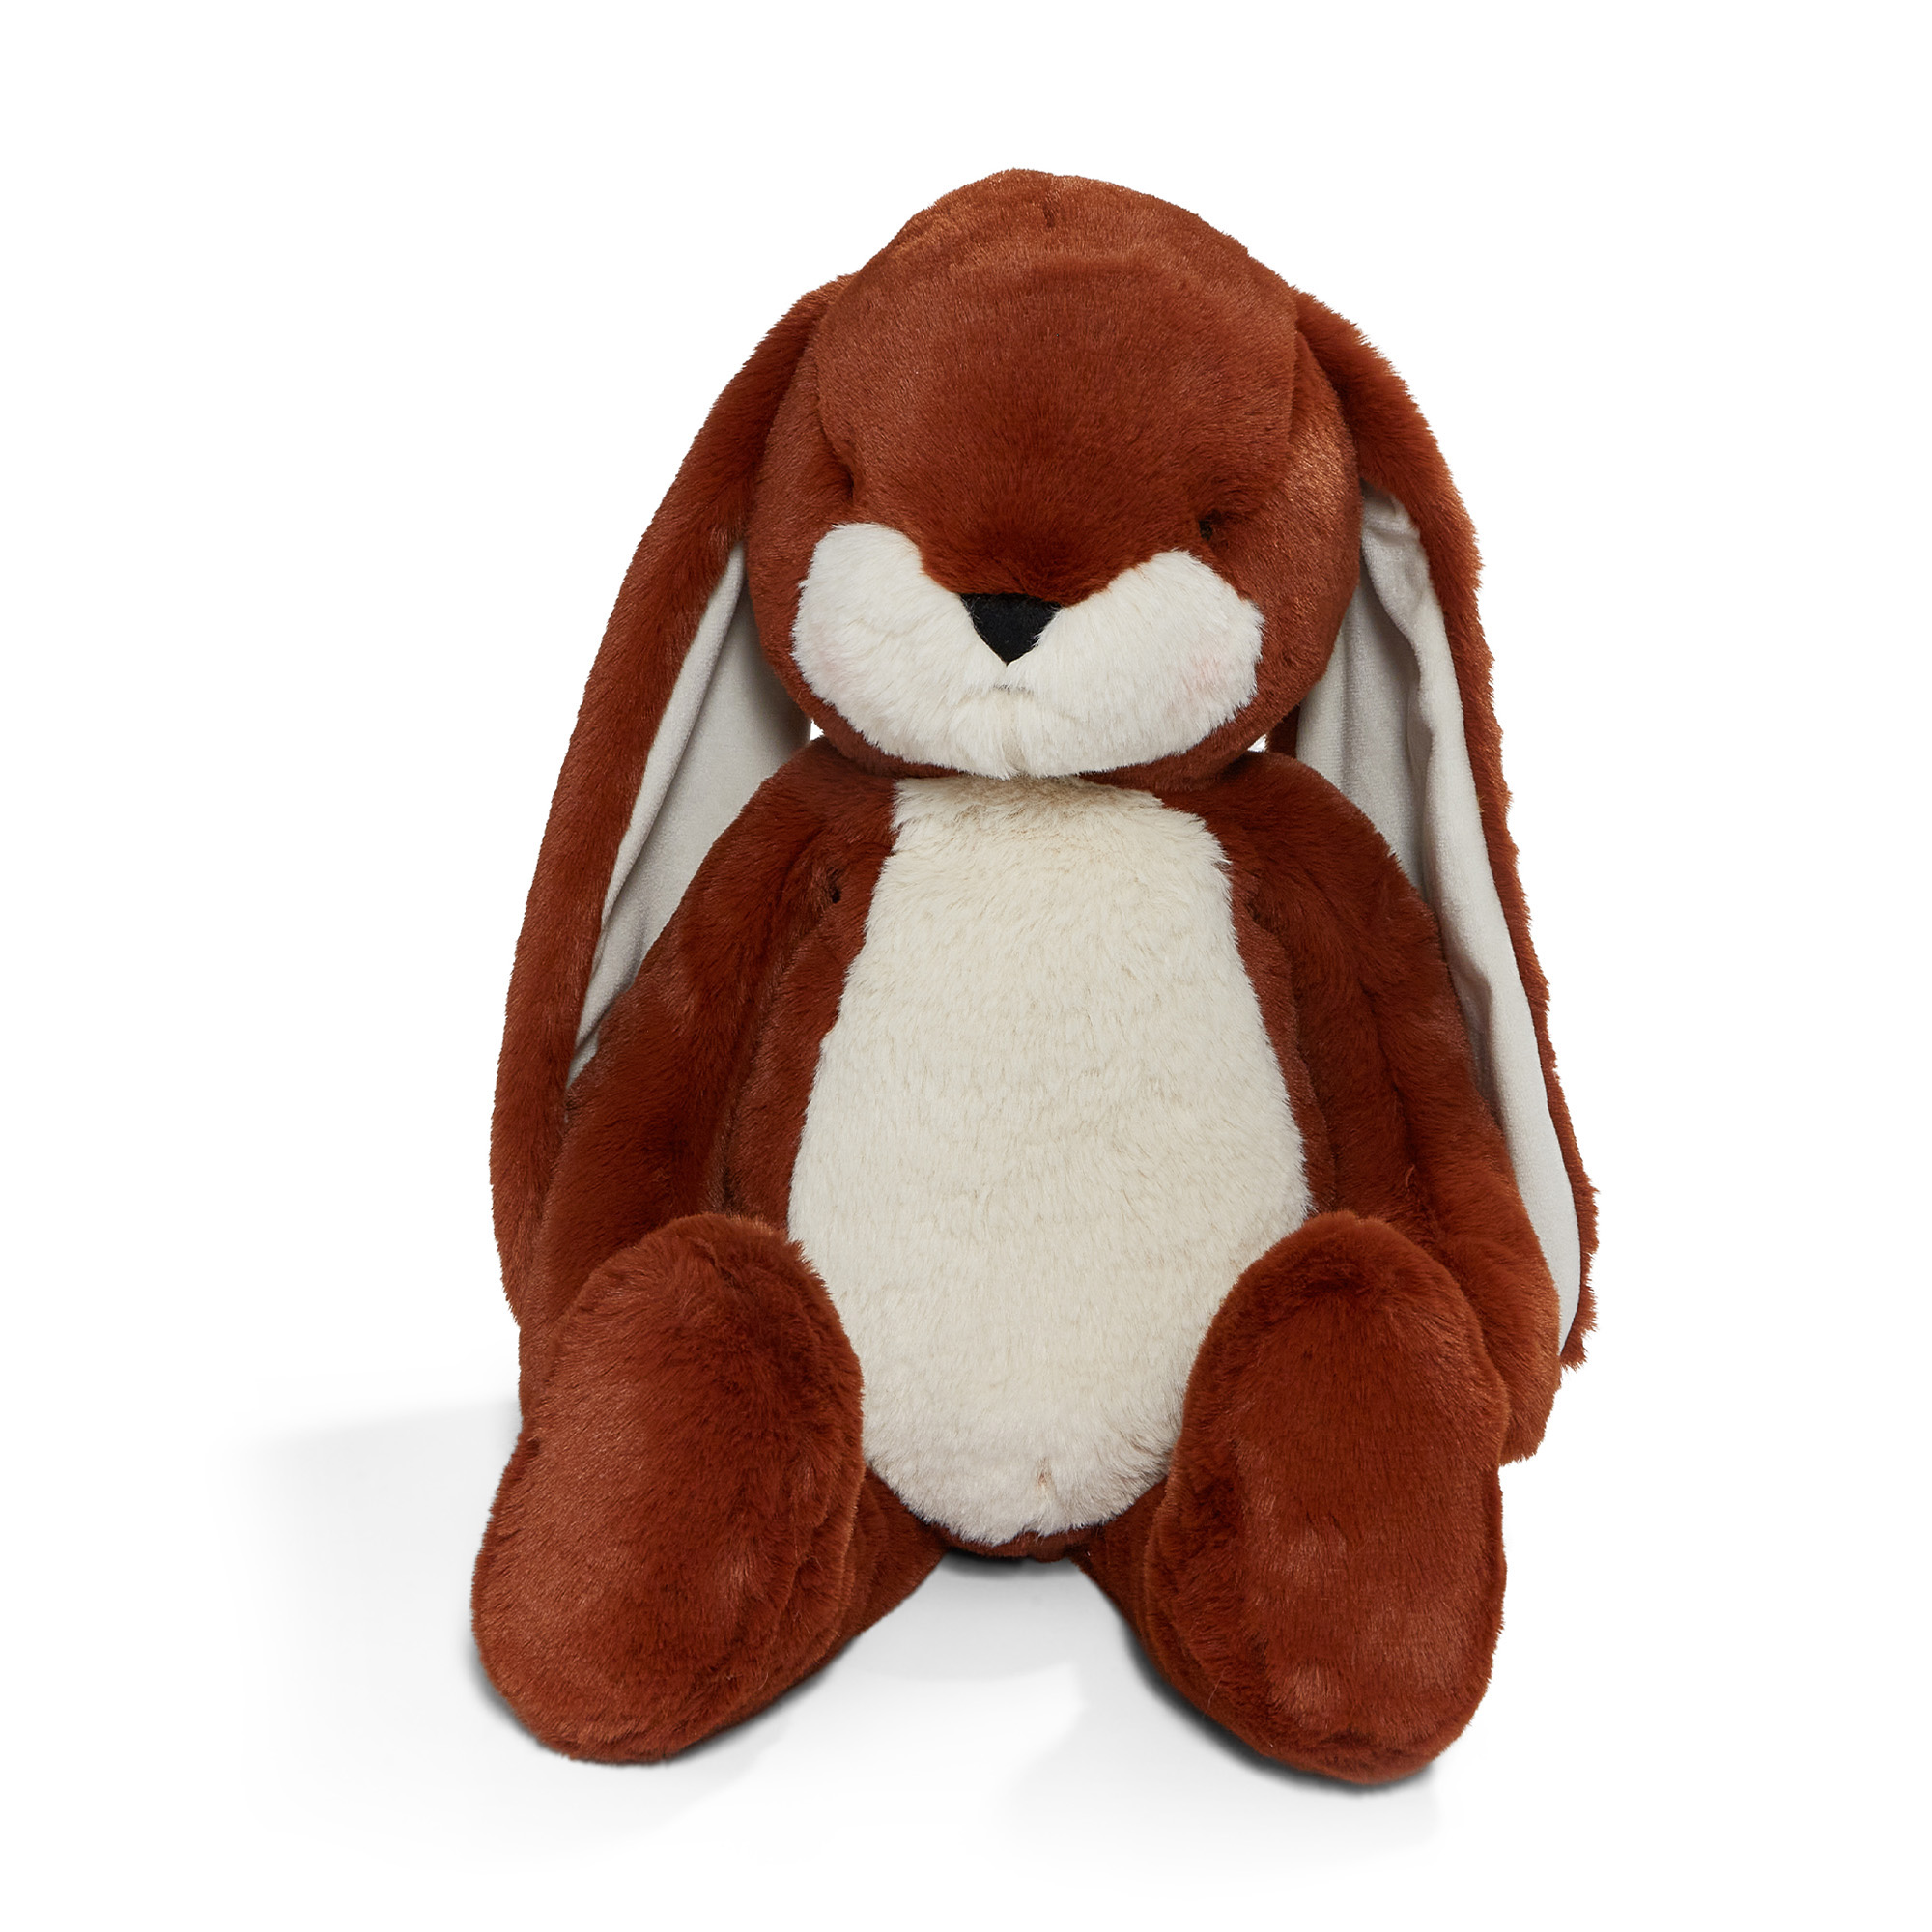 Peluche big nibble floppy paprika 50cm - Bunnies By The Bay